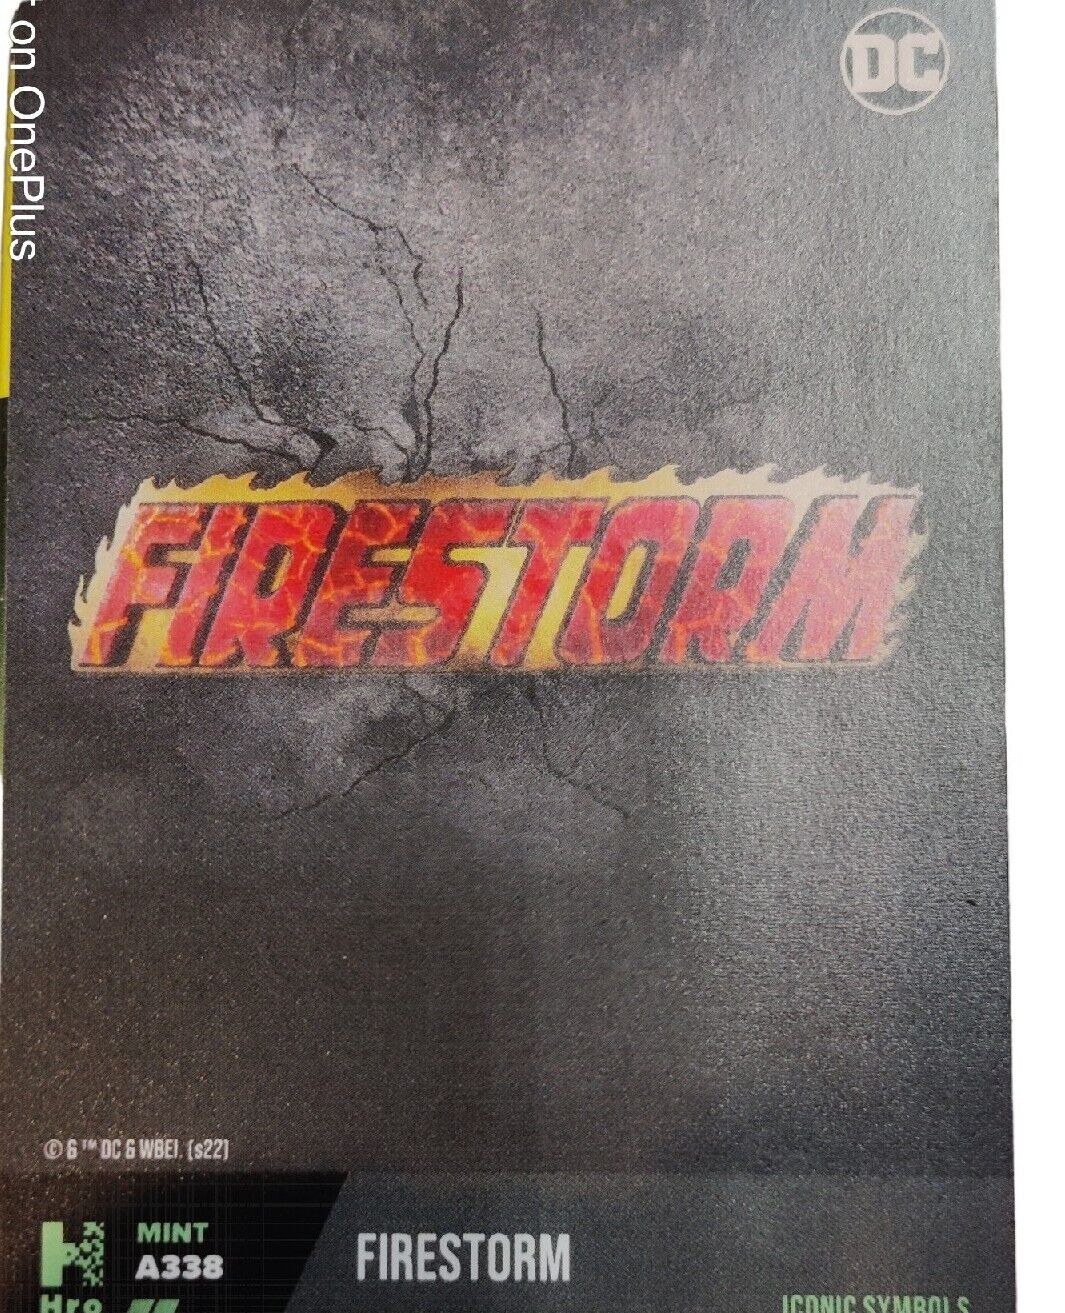 2022 DC Chapter 2 Physical Card Iconic Symbols Firestorm Mint Low 338